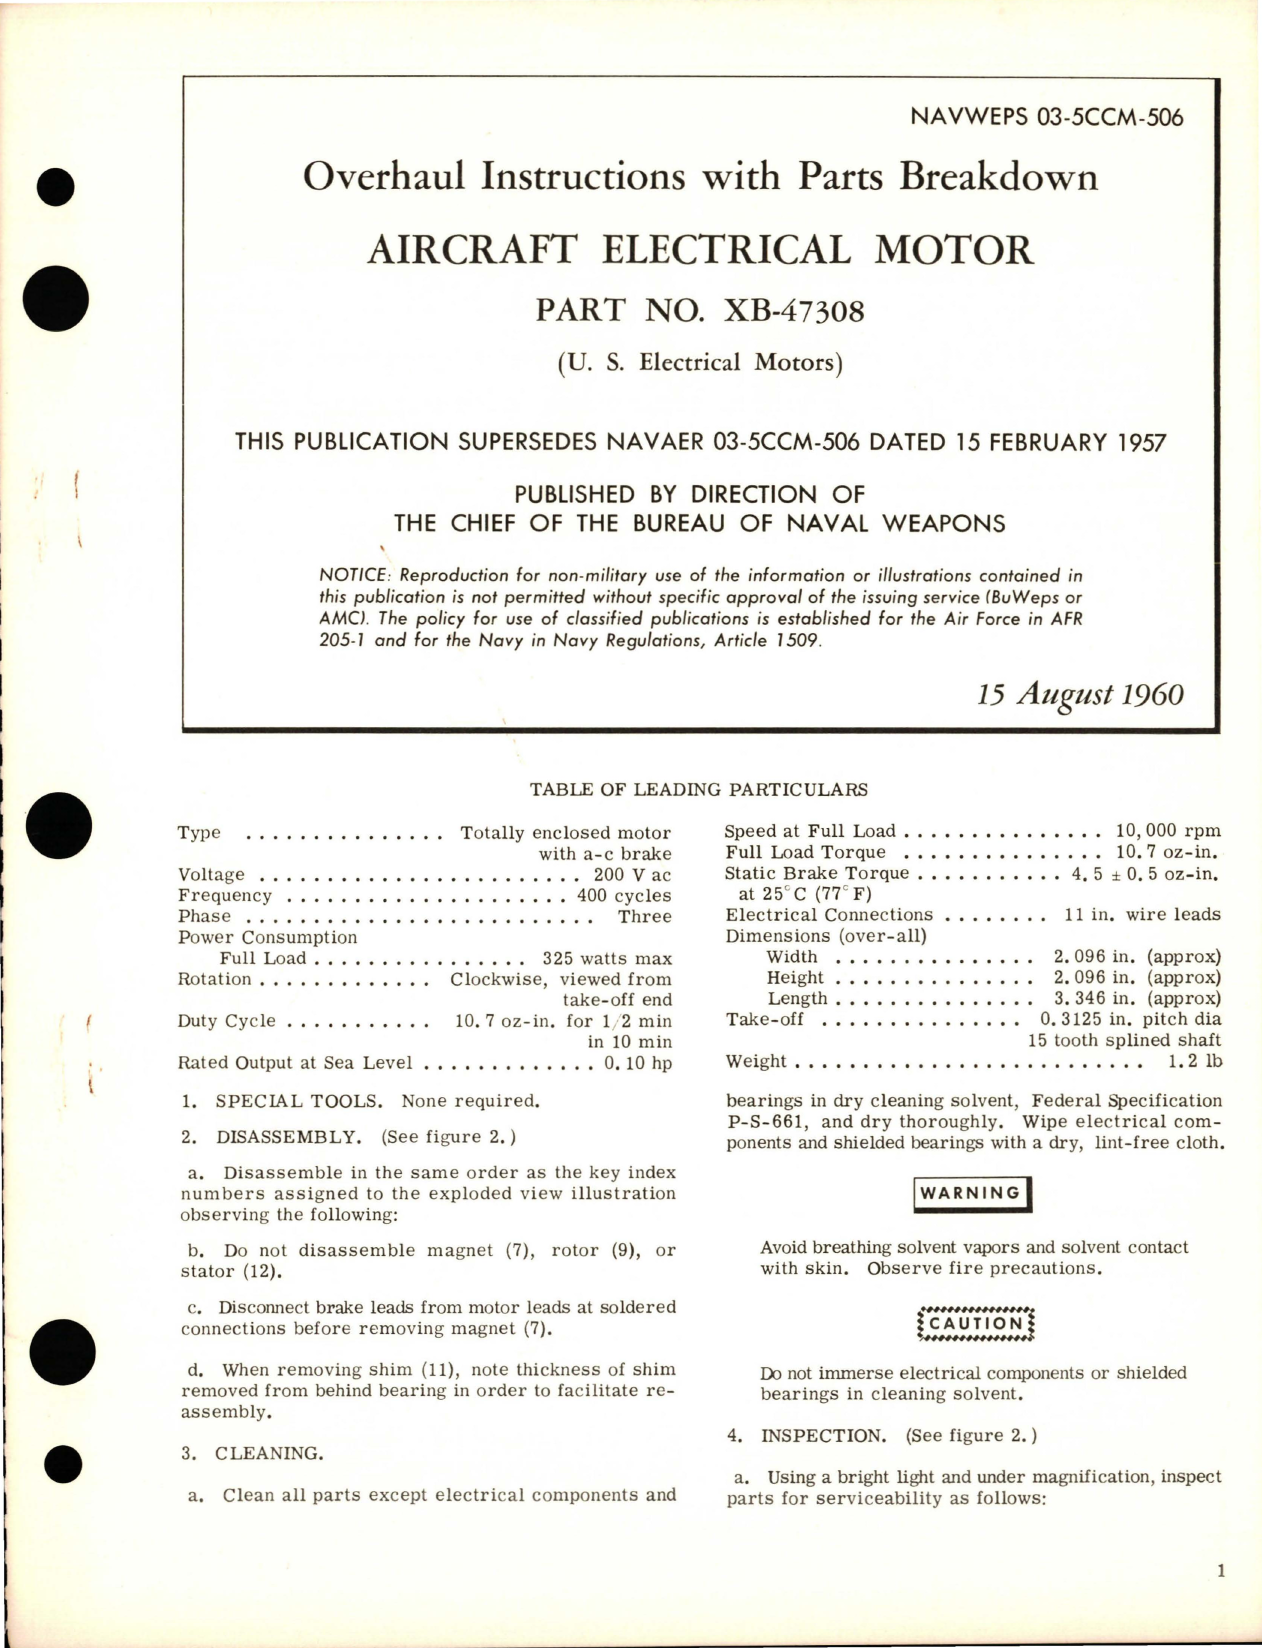 Sample page 1 from AirCorps Library document: Overhaul Instructions with Parts Breakdown for Electric Motor - Part XB-47308